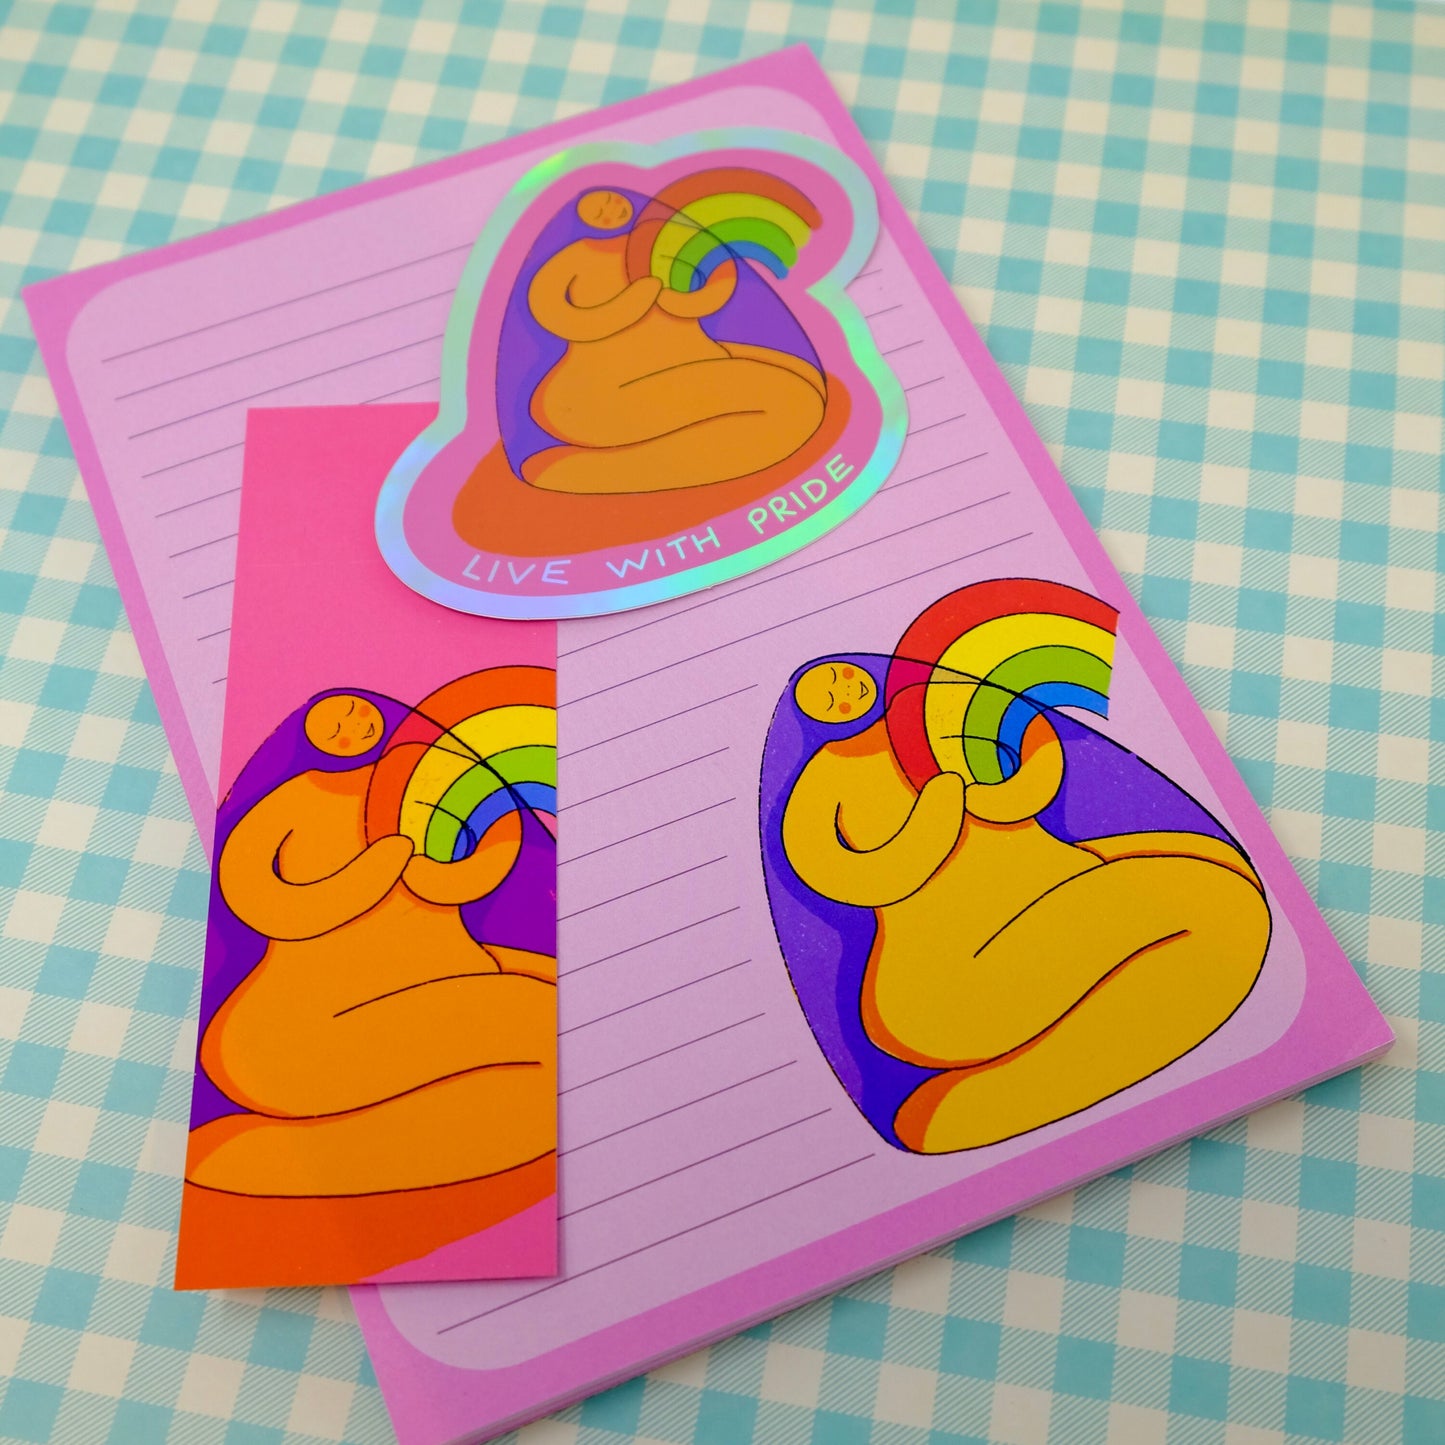 Rainbow Goddess Stationary Gift Set - Live With Pride Stationary Bundle - Pink LGBTQIA Notepad, Bookmark and Sticker